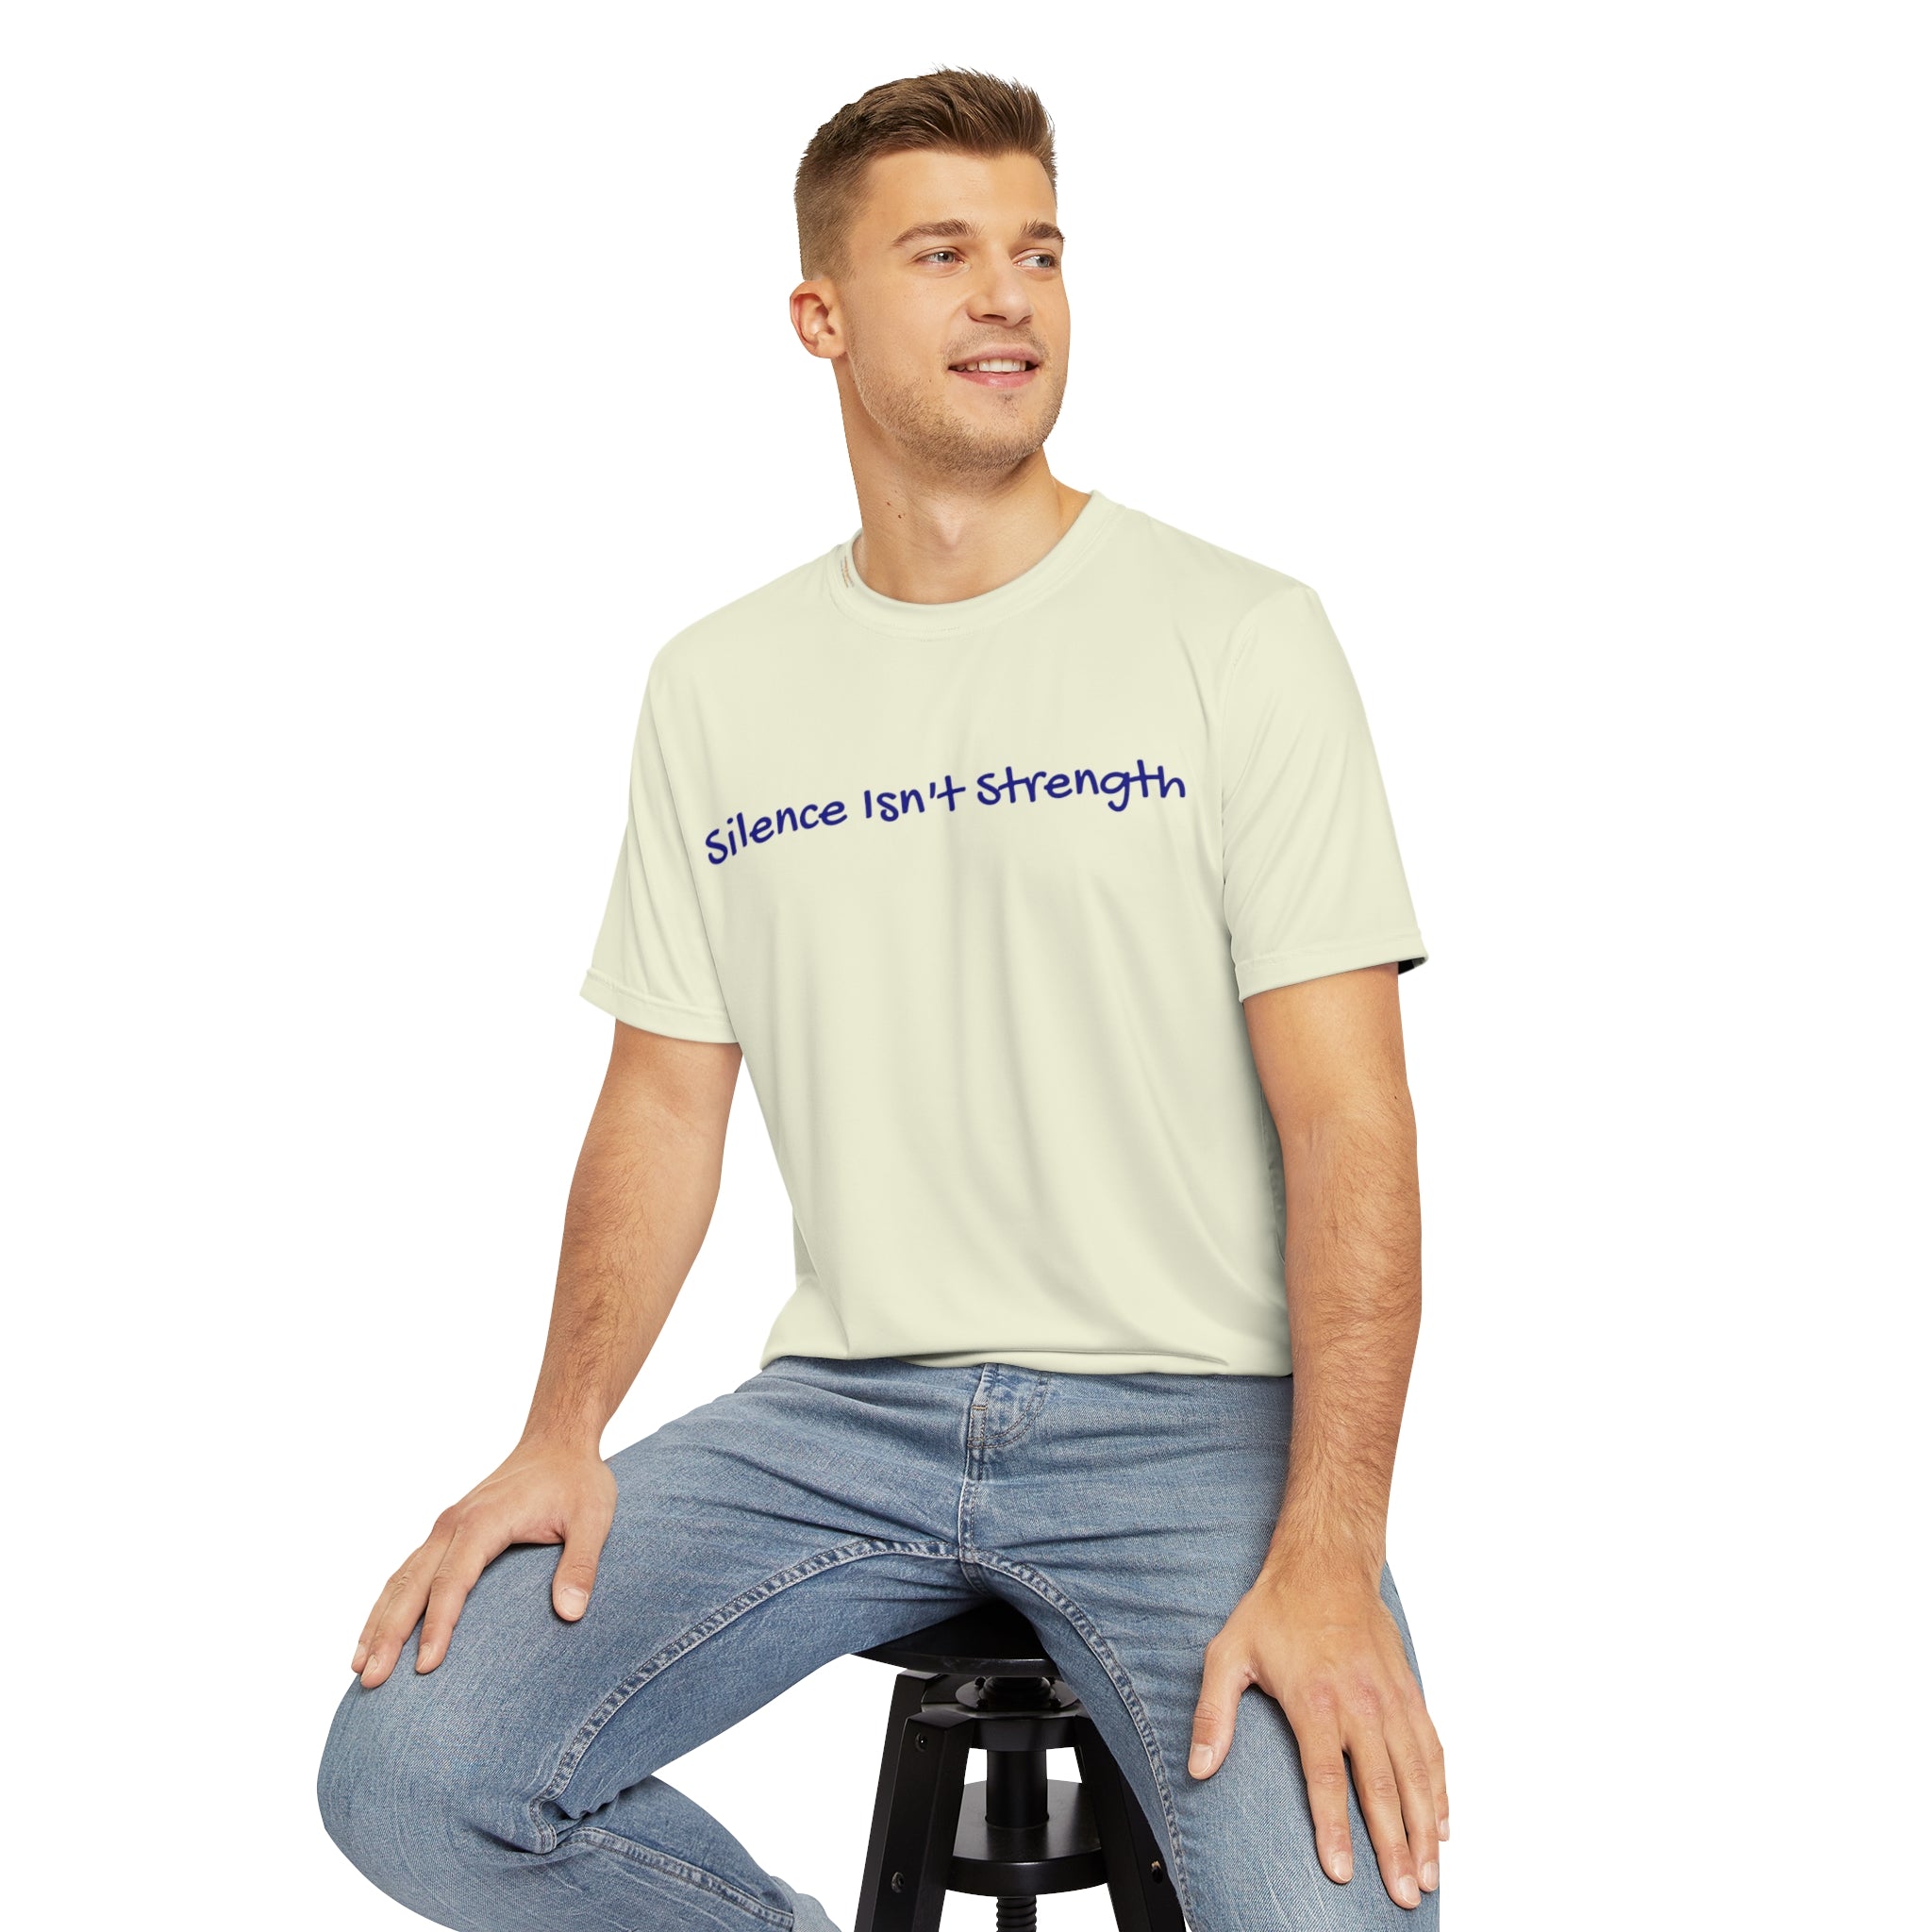 Silence Isn't Strength T-shirt speak up for mental health Athleisure Wear Comfort Empowerment Mental Health Pledge Donation Polyester All Over Prints 7645289908054899413_2048 Printify